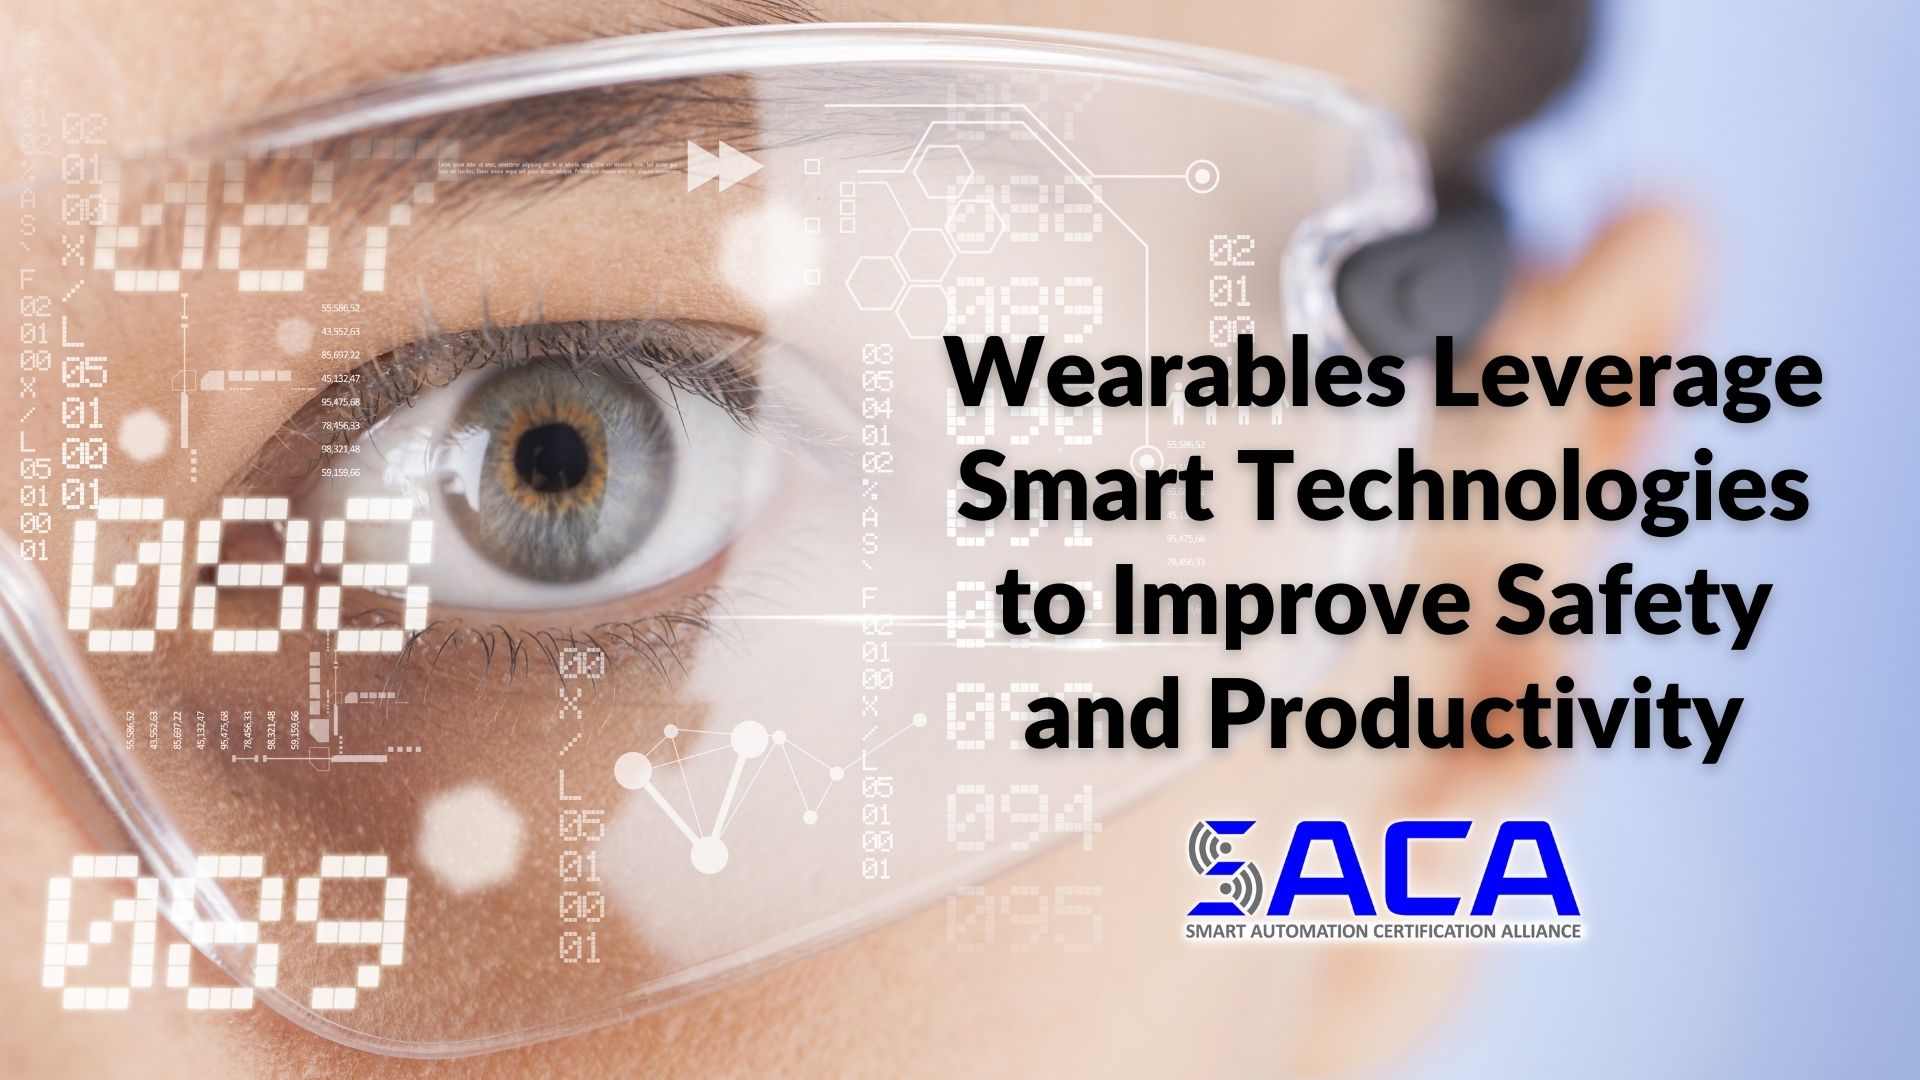 SACA - Wearables Leverage Smart Technologies to Improve Safety and Productivity